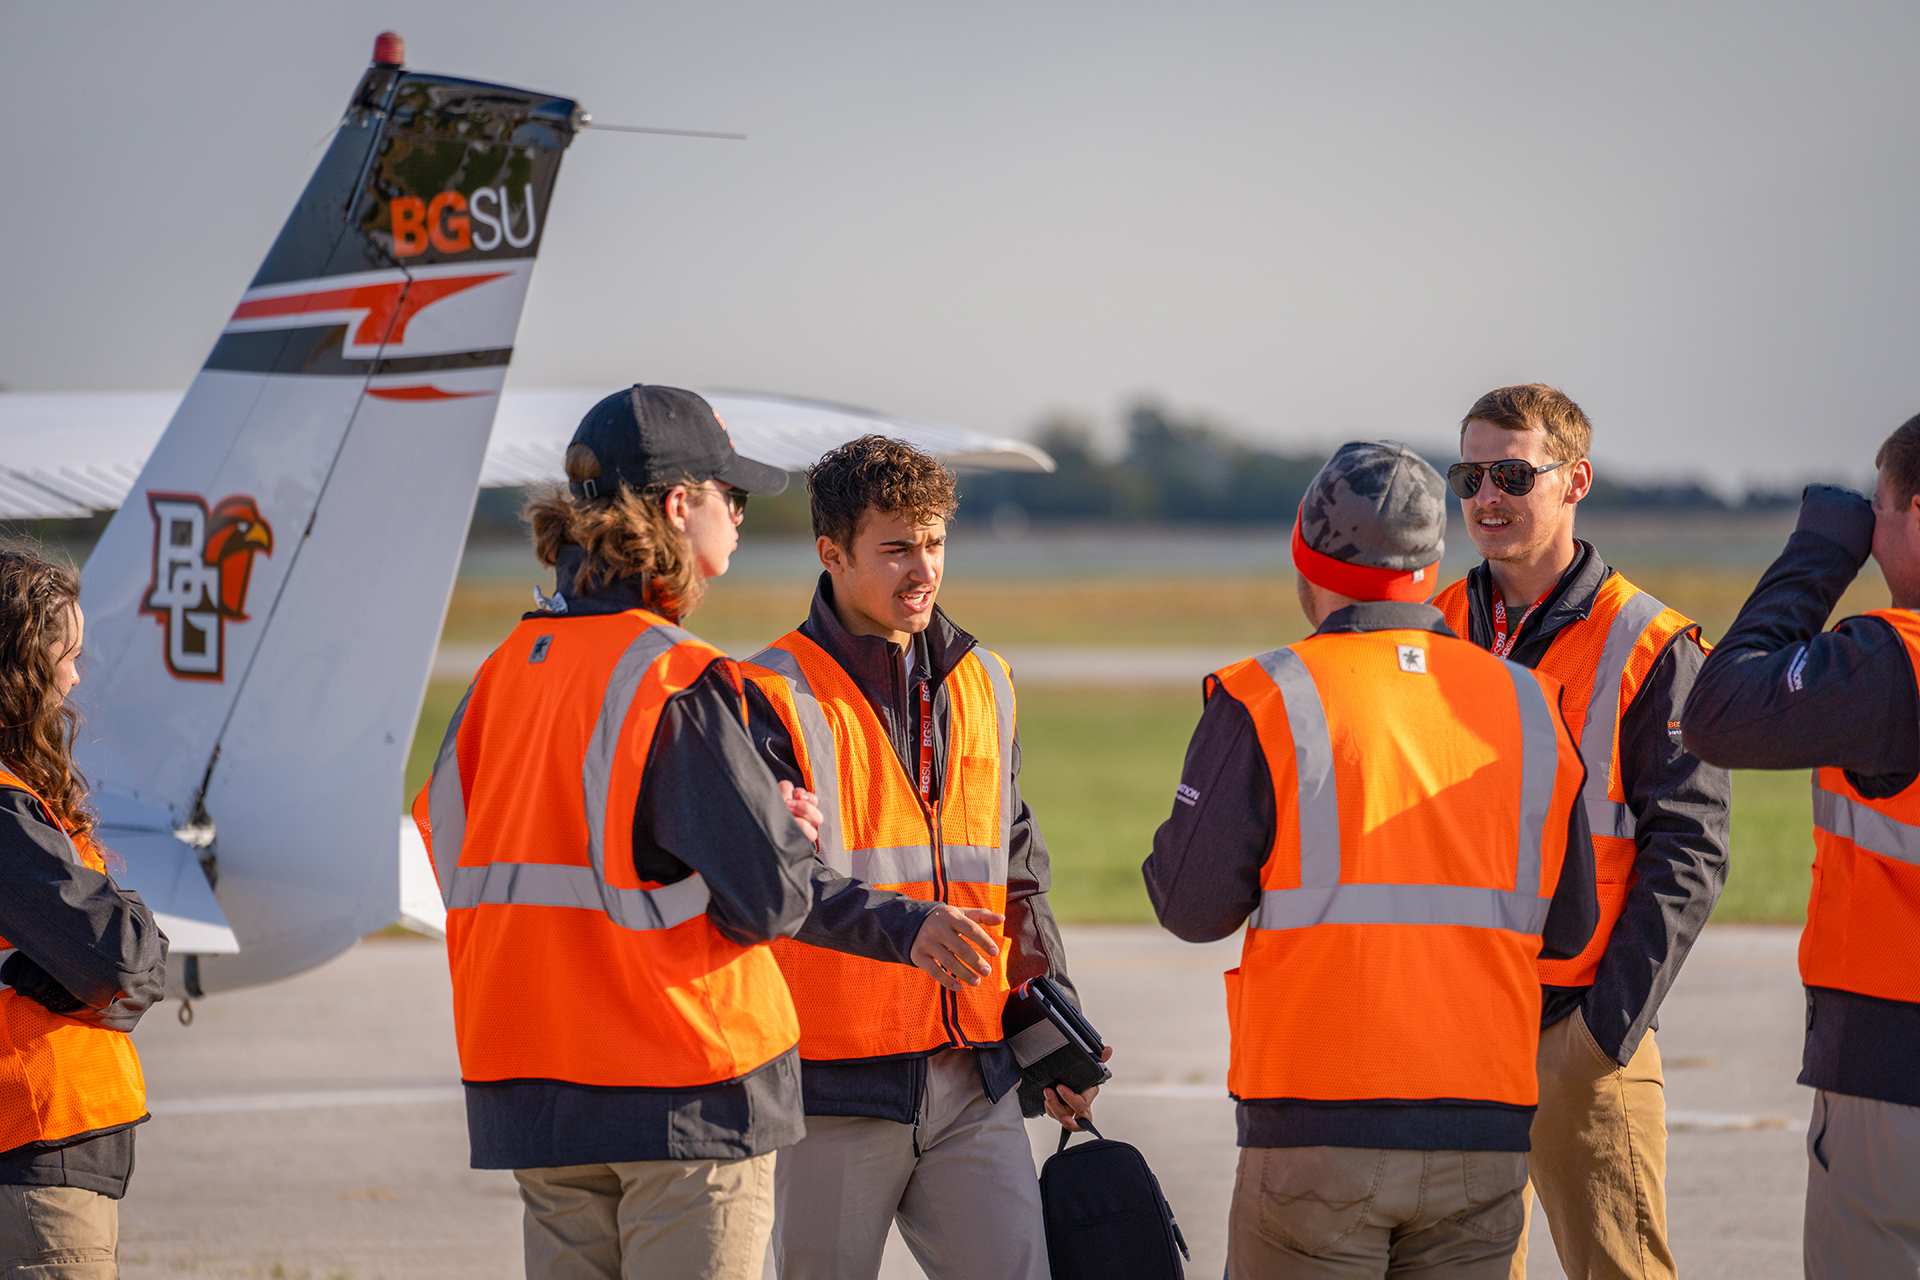 Aviation students talk to each other at the airport